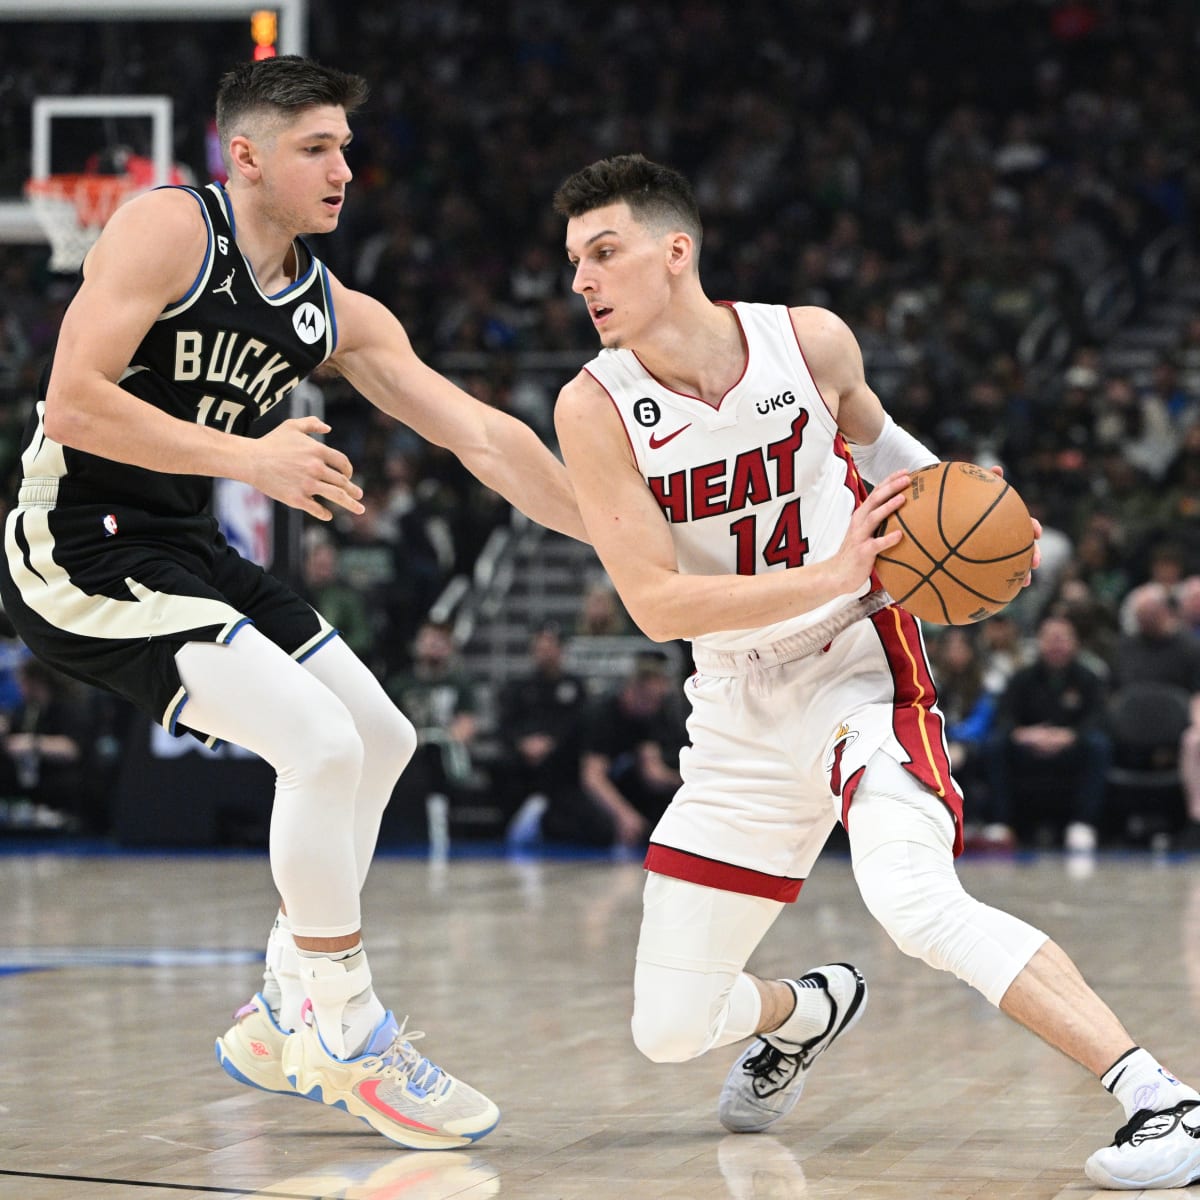 What happened to Tyler Herro? - Basketball Network - Your daily dose of  basketball